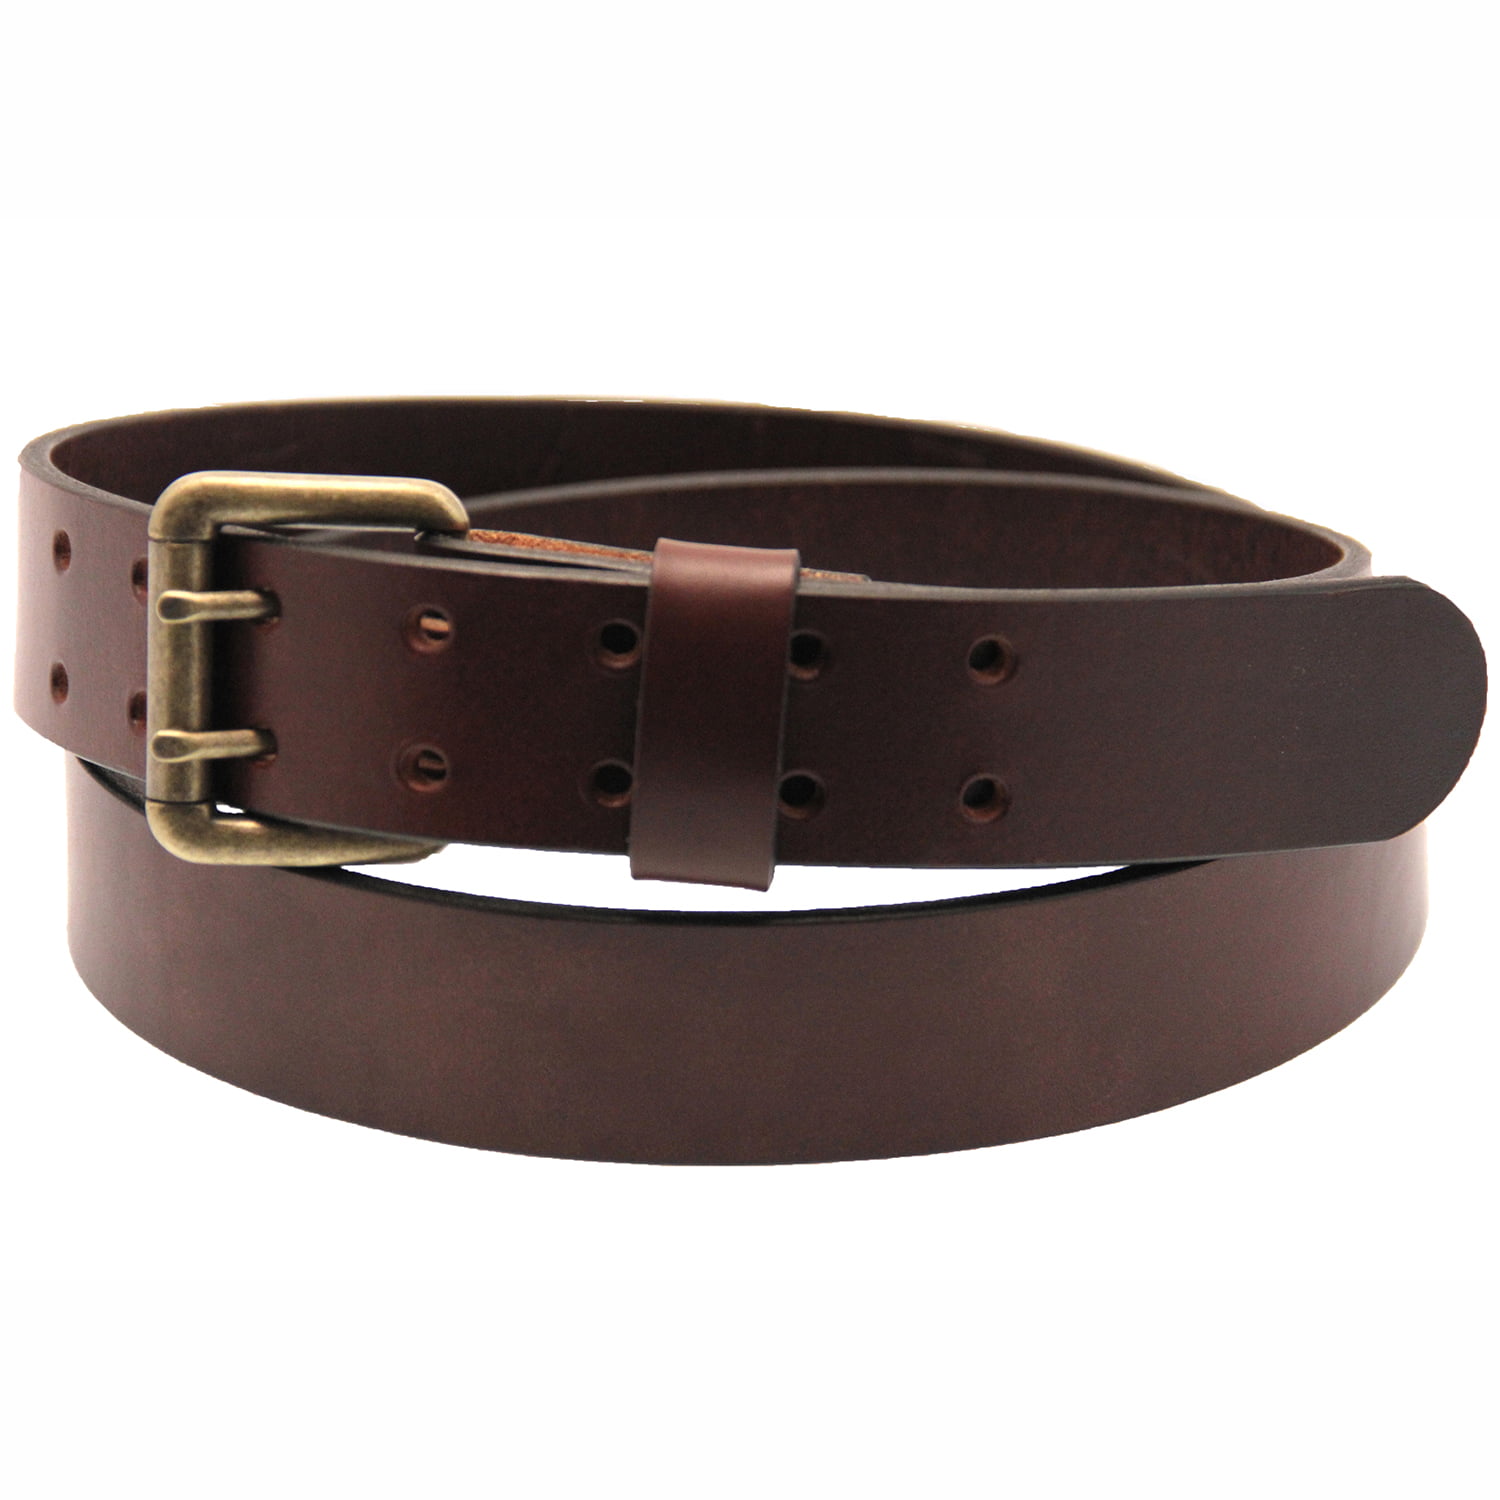 Orion Leather 1 1/2 Sunset Brown Harness Leather Belt Double Hole ...